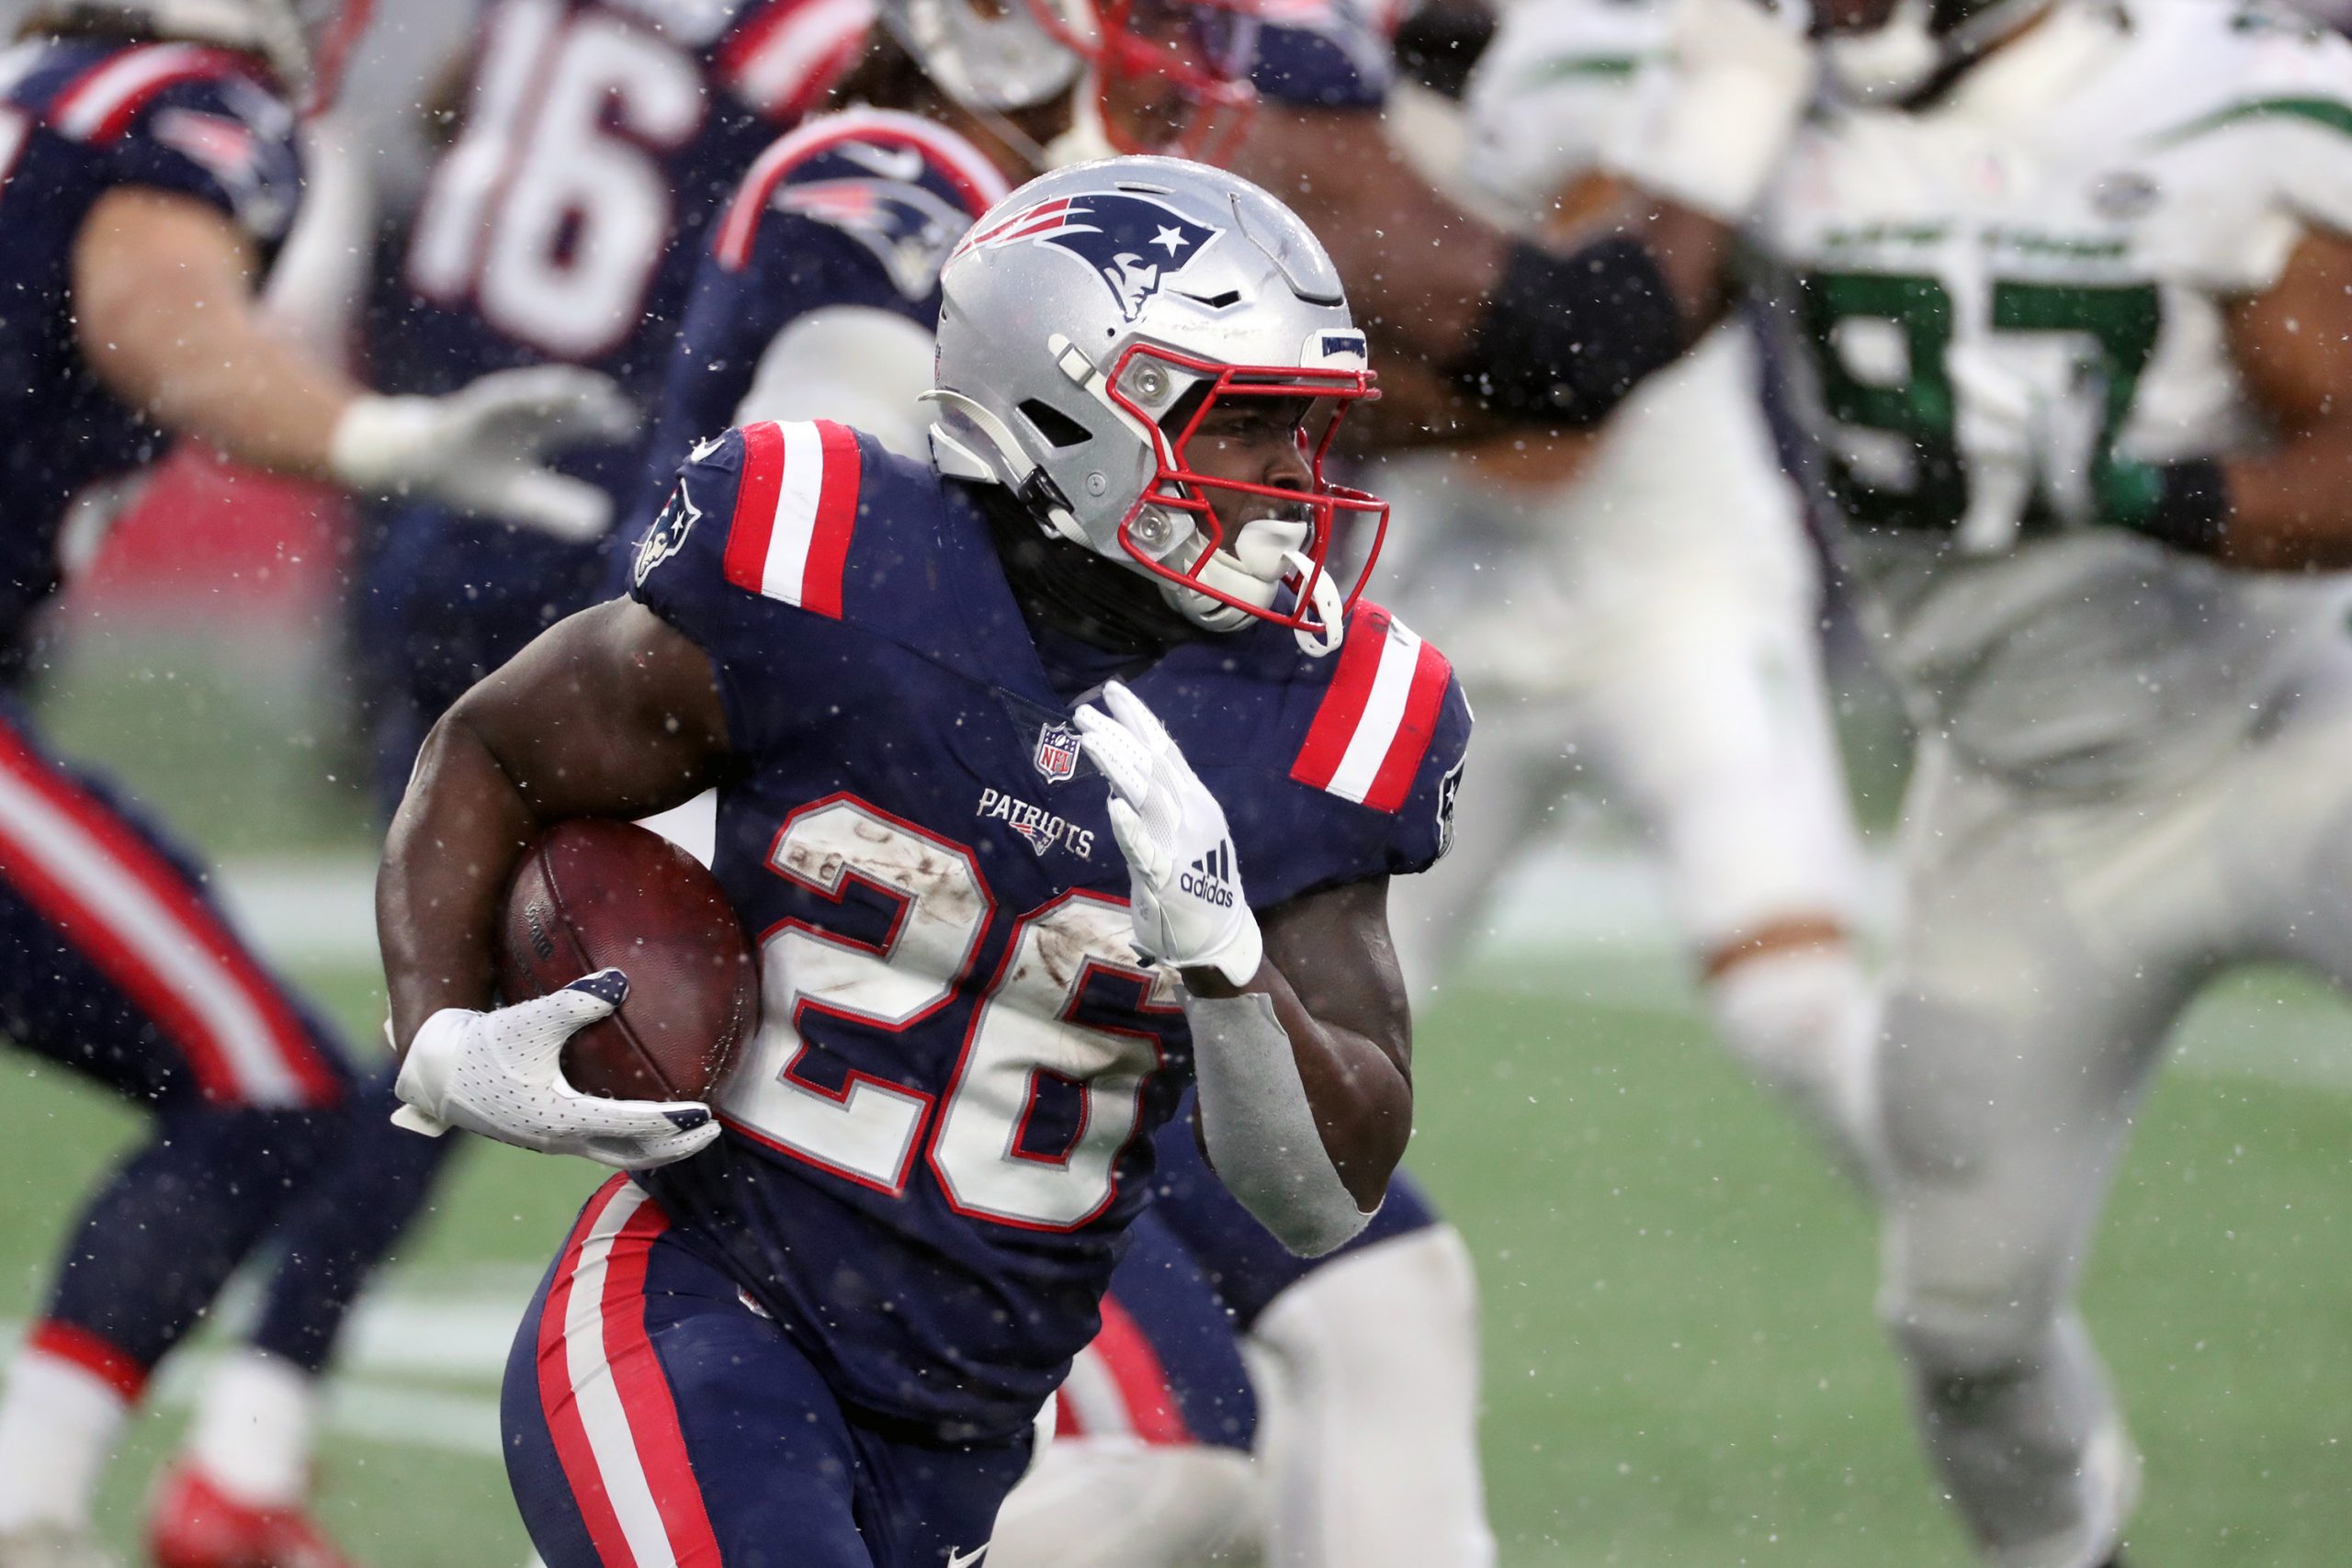 Sony Michel of the New England Patriots has a long gain in the snow against the New York Jets.